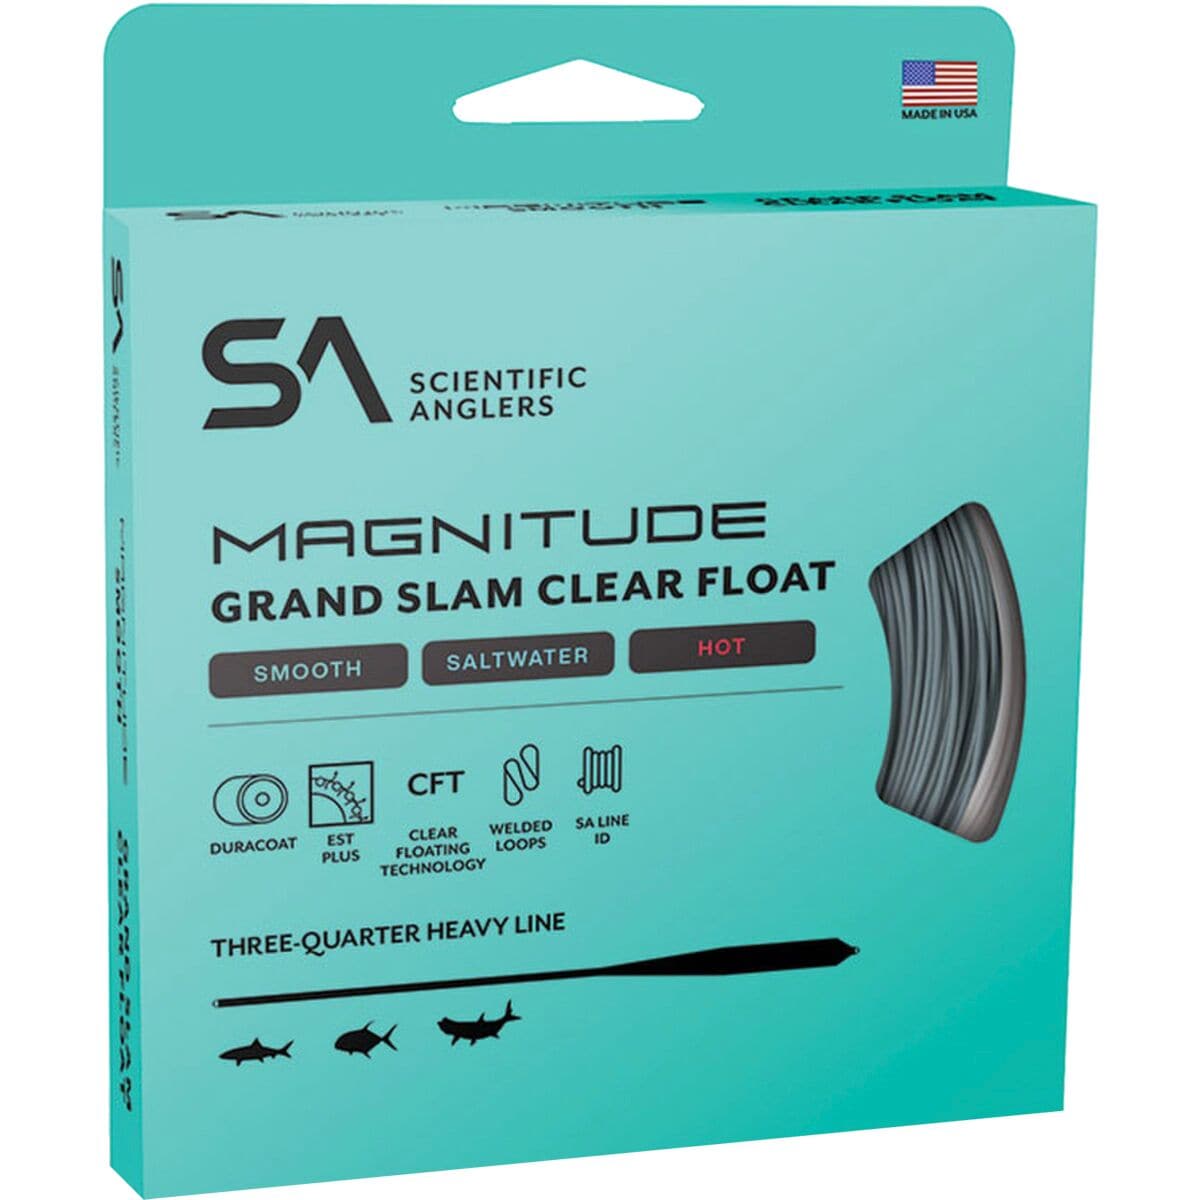 Magnitude Smooth Grand Slam Full Clear Float Line Scientific Anglers